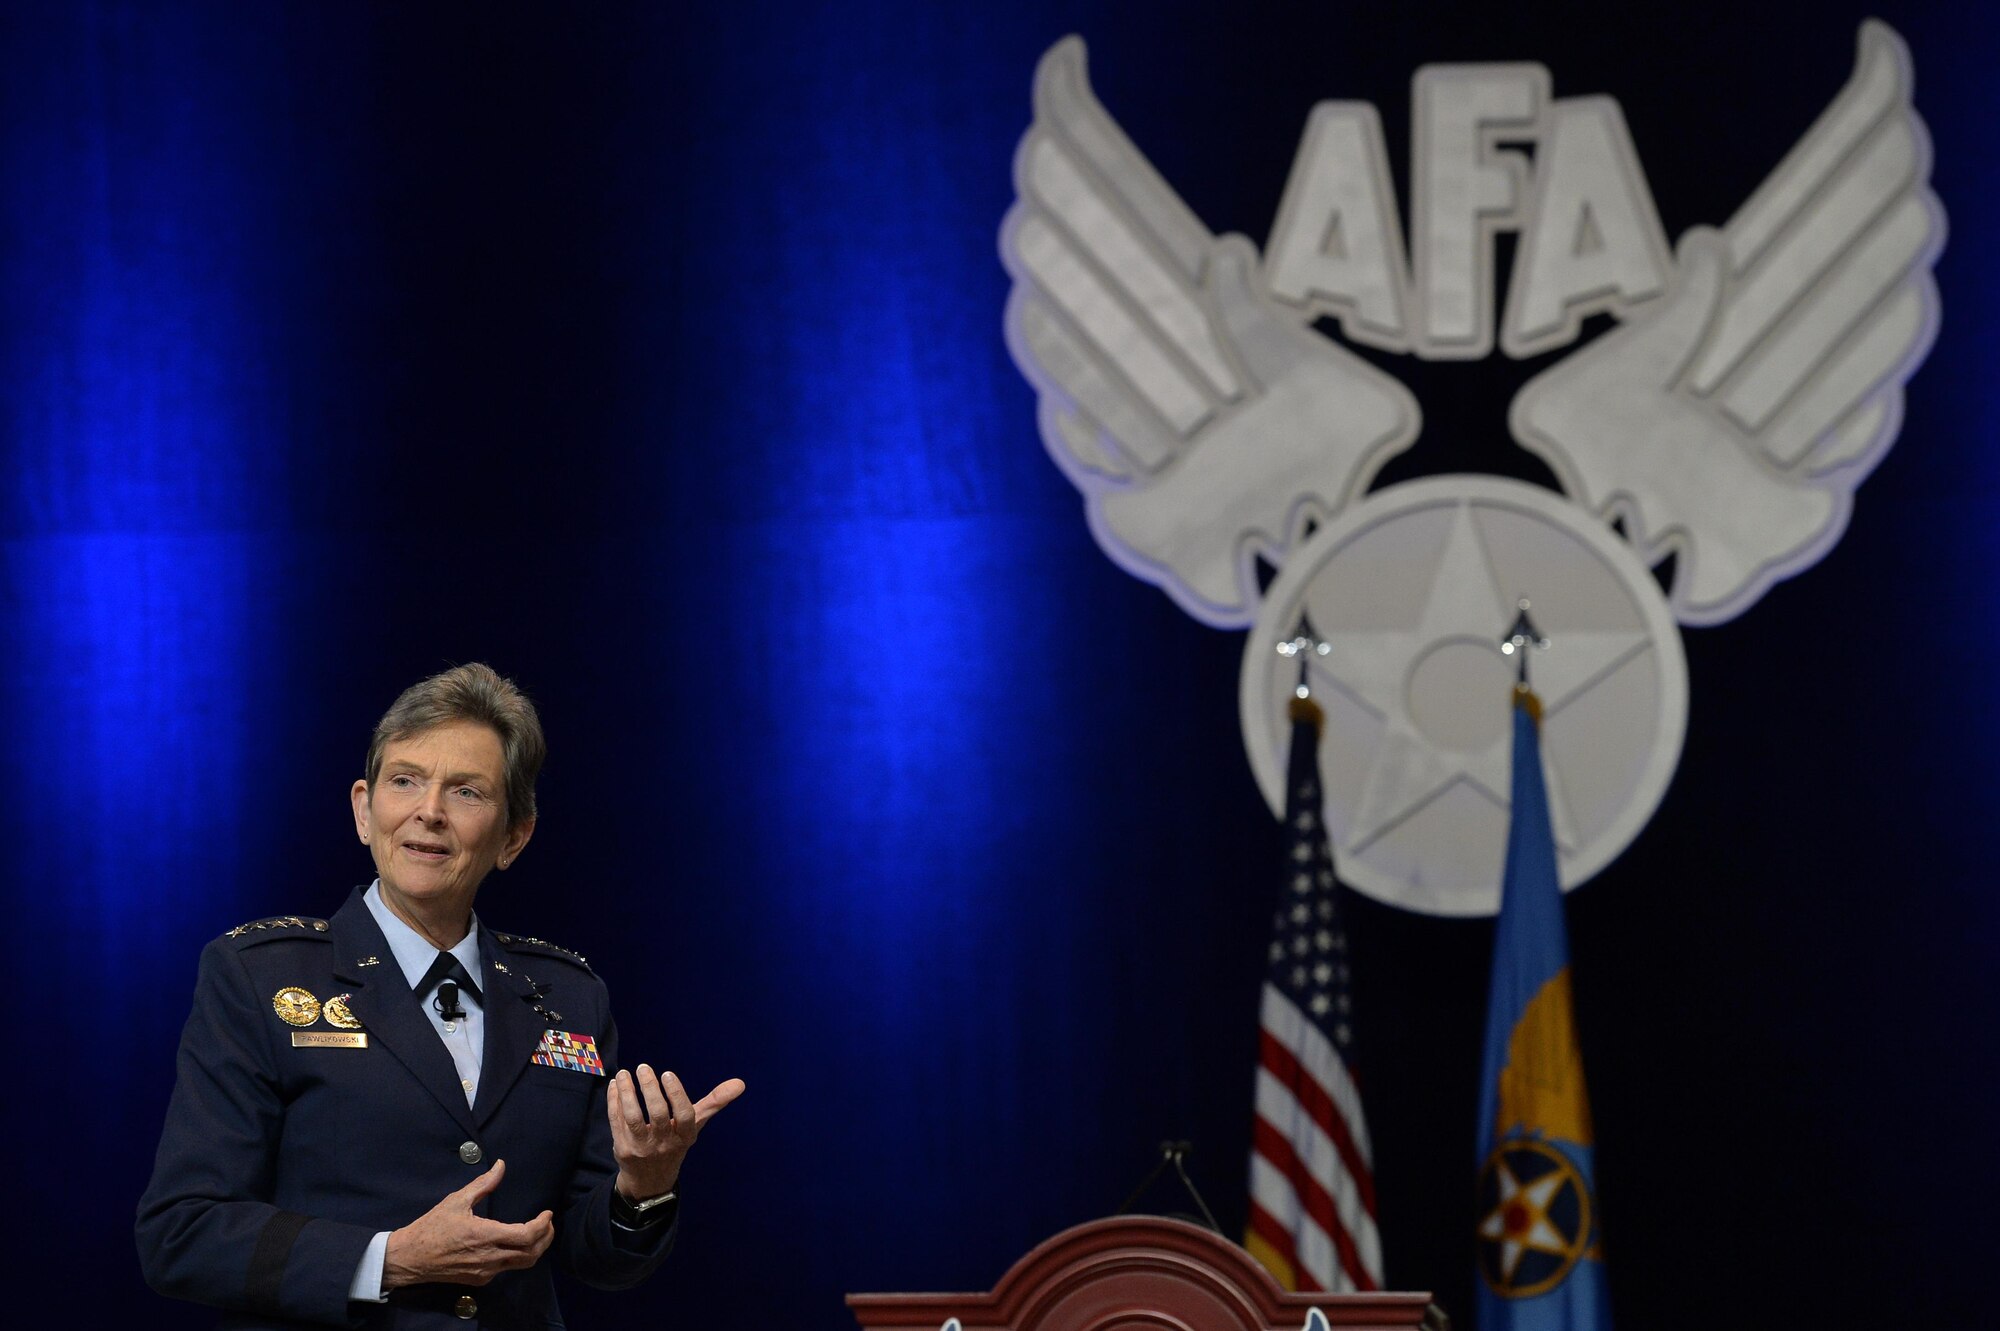 Gen. Ellen M. Pawlikowski, the Air Force Materiel Command commander, speaks to an audience during the Air Force Association's Air, Space and Cyber Conference in National Harbor, Md., Sept. 21, 2016. She spoke about the importance of cyber security. (U.S. Air Force photo/Staff Sgt. Whitney Stanfield)

